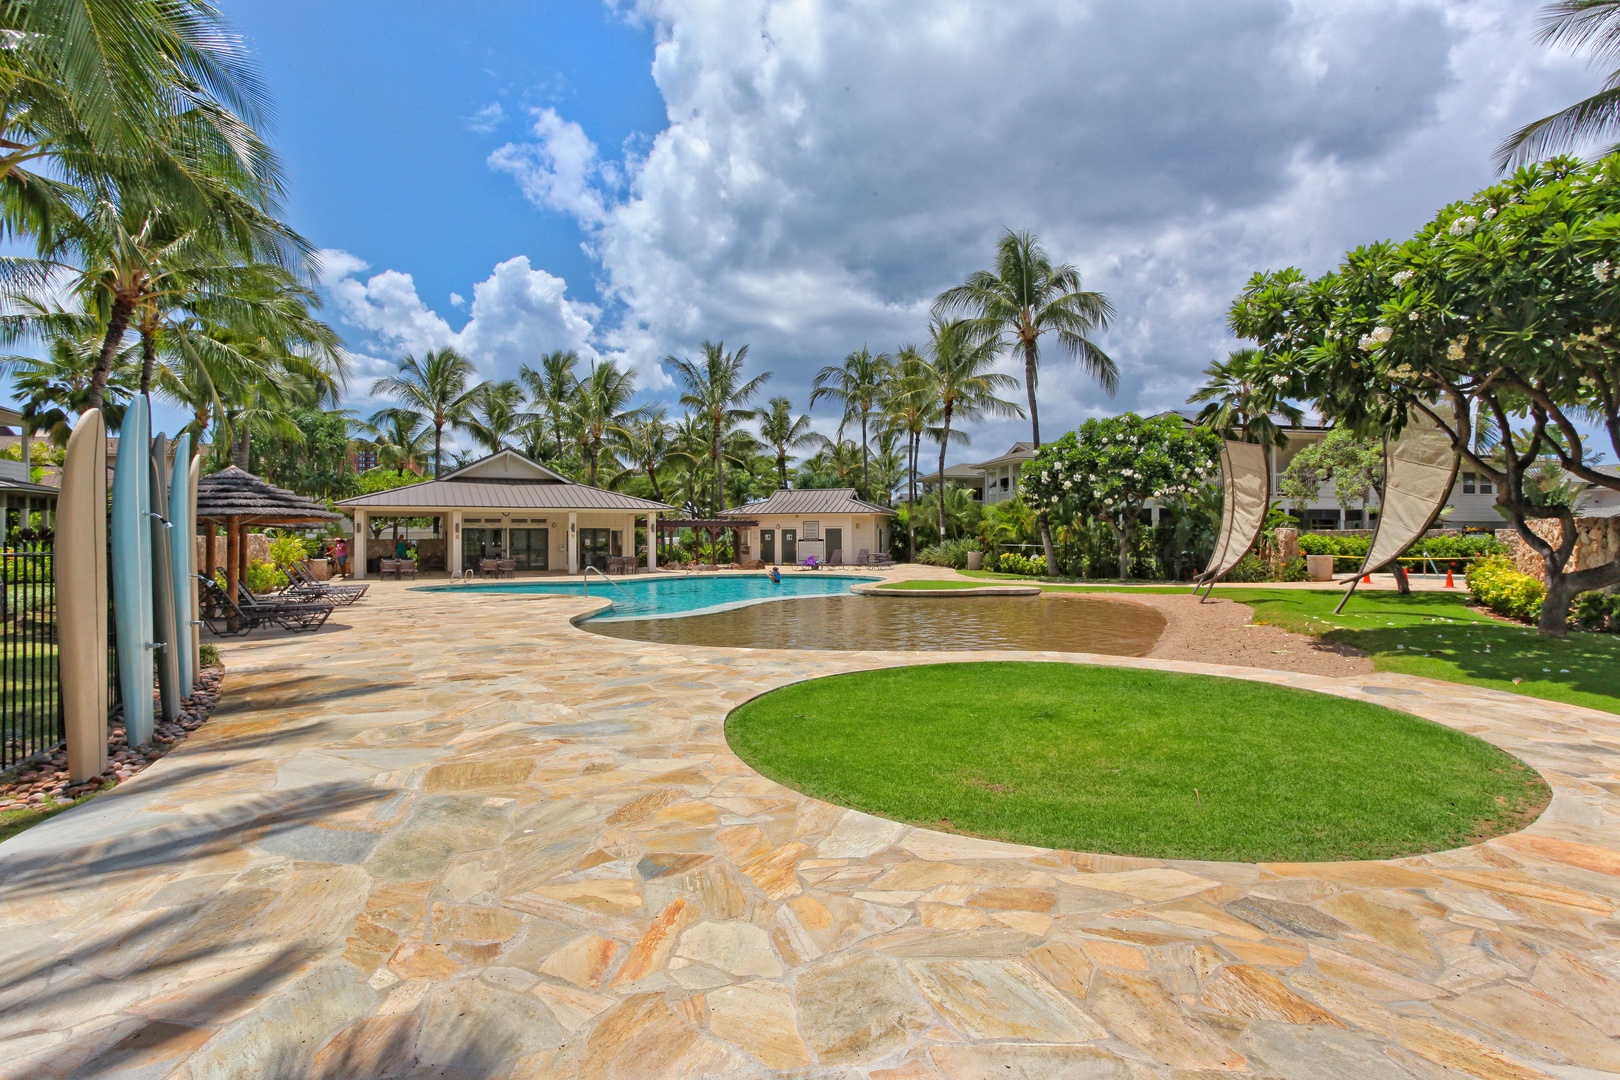 Kapolei Vacation Rentals, Coconut Plantation 1158-1 - Picturesque skies for an idyllic dip in the pool.